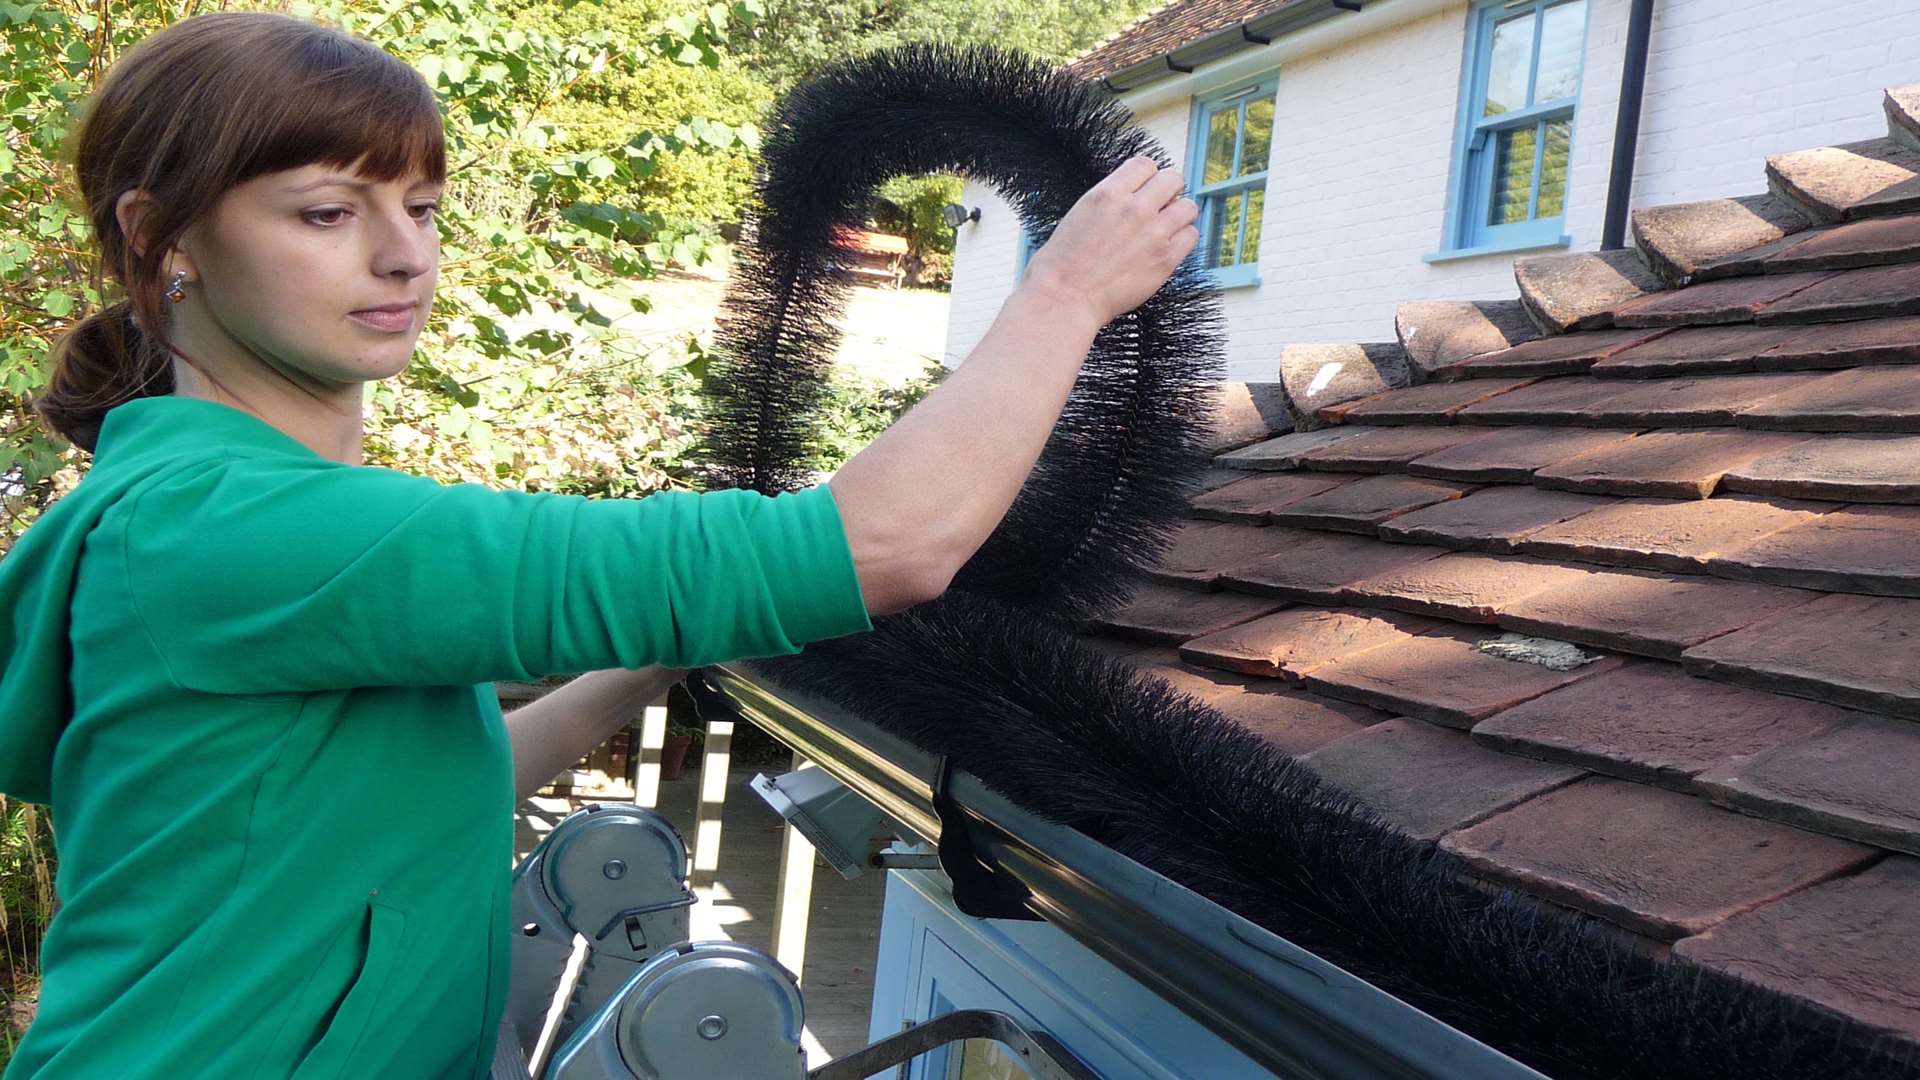 The Hedgehog Gutter Brush can be installed by anyone